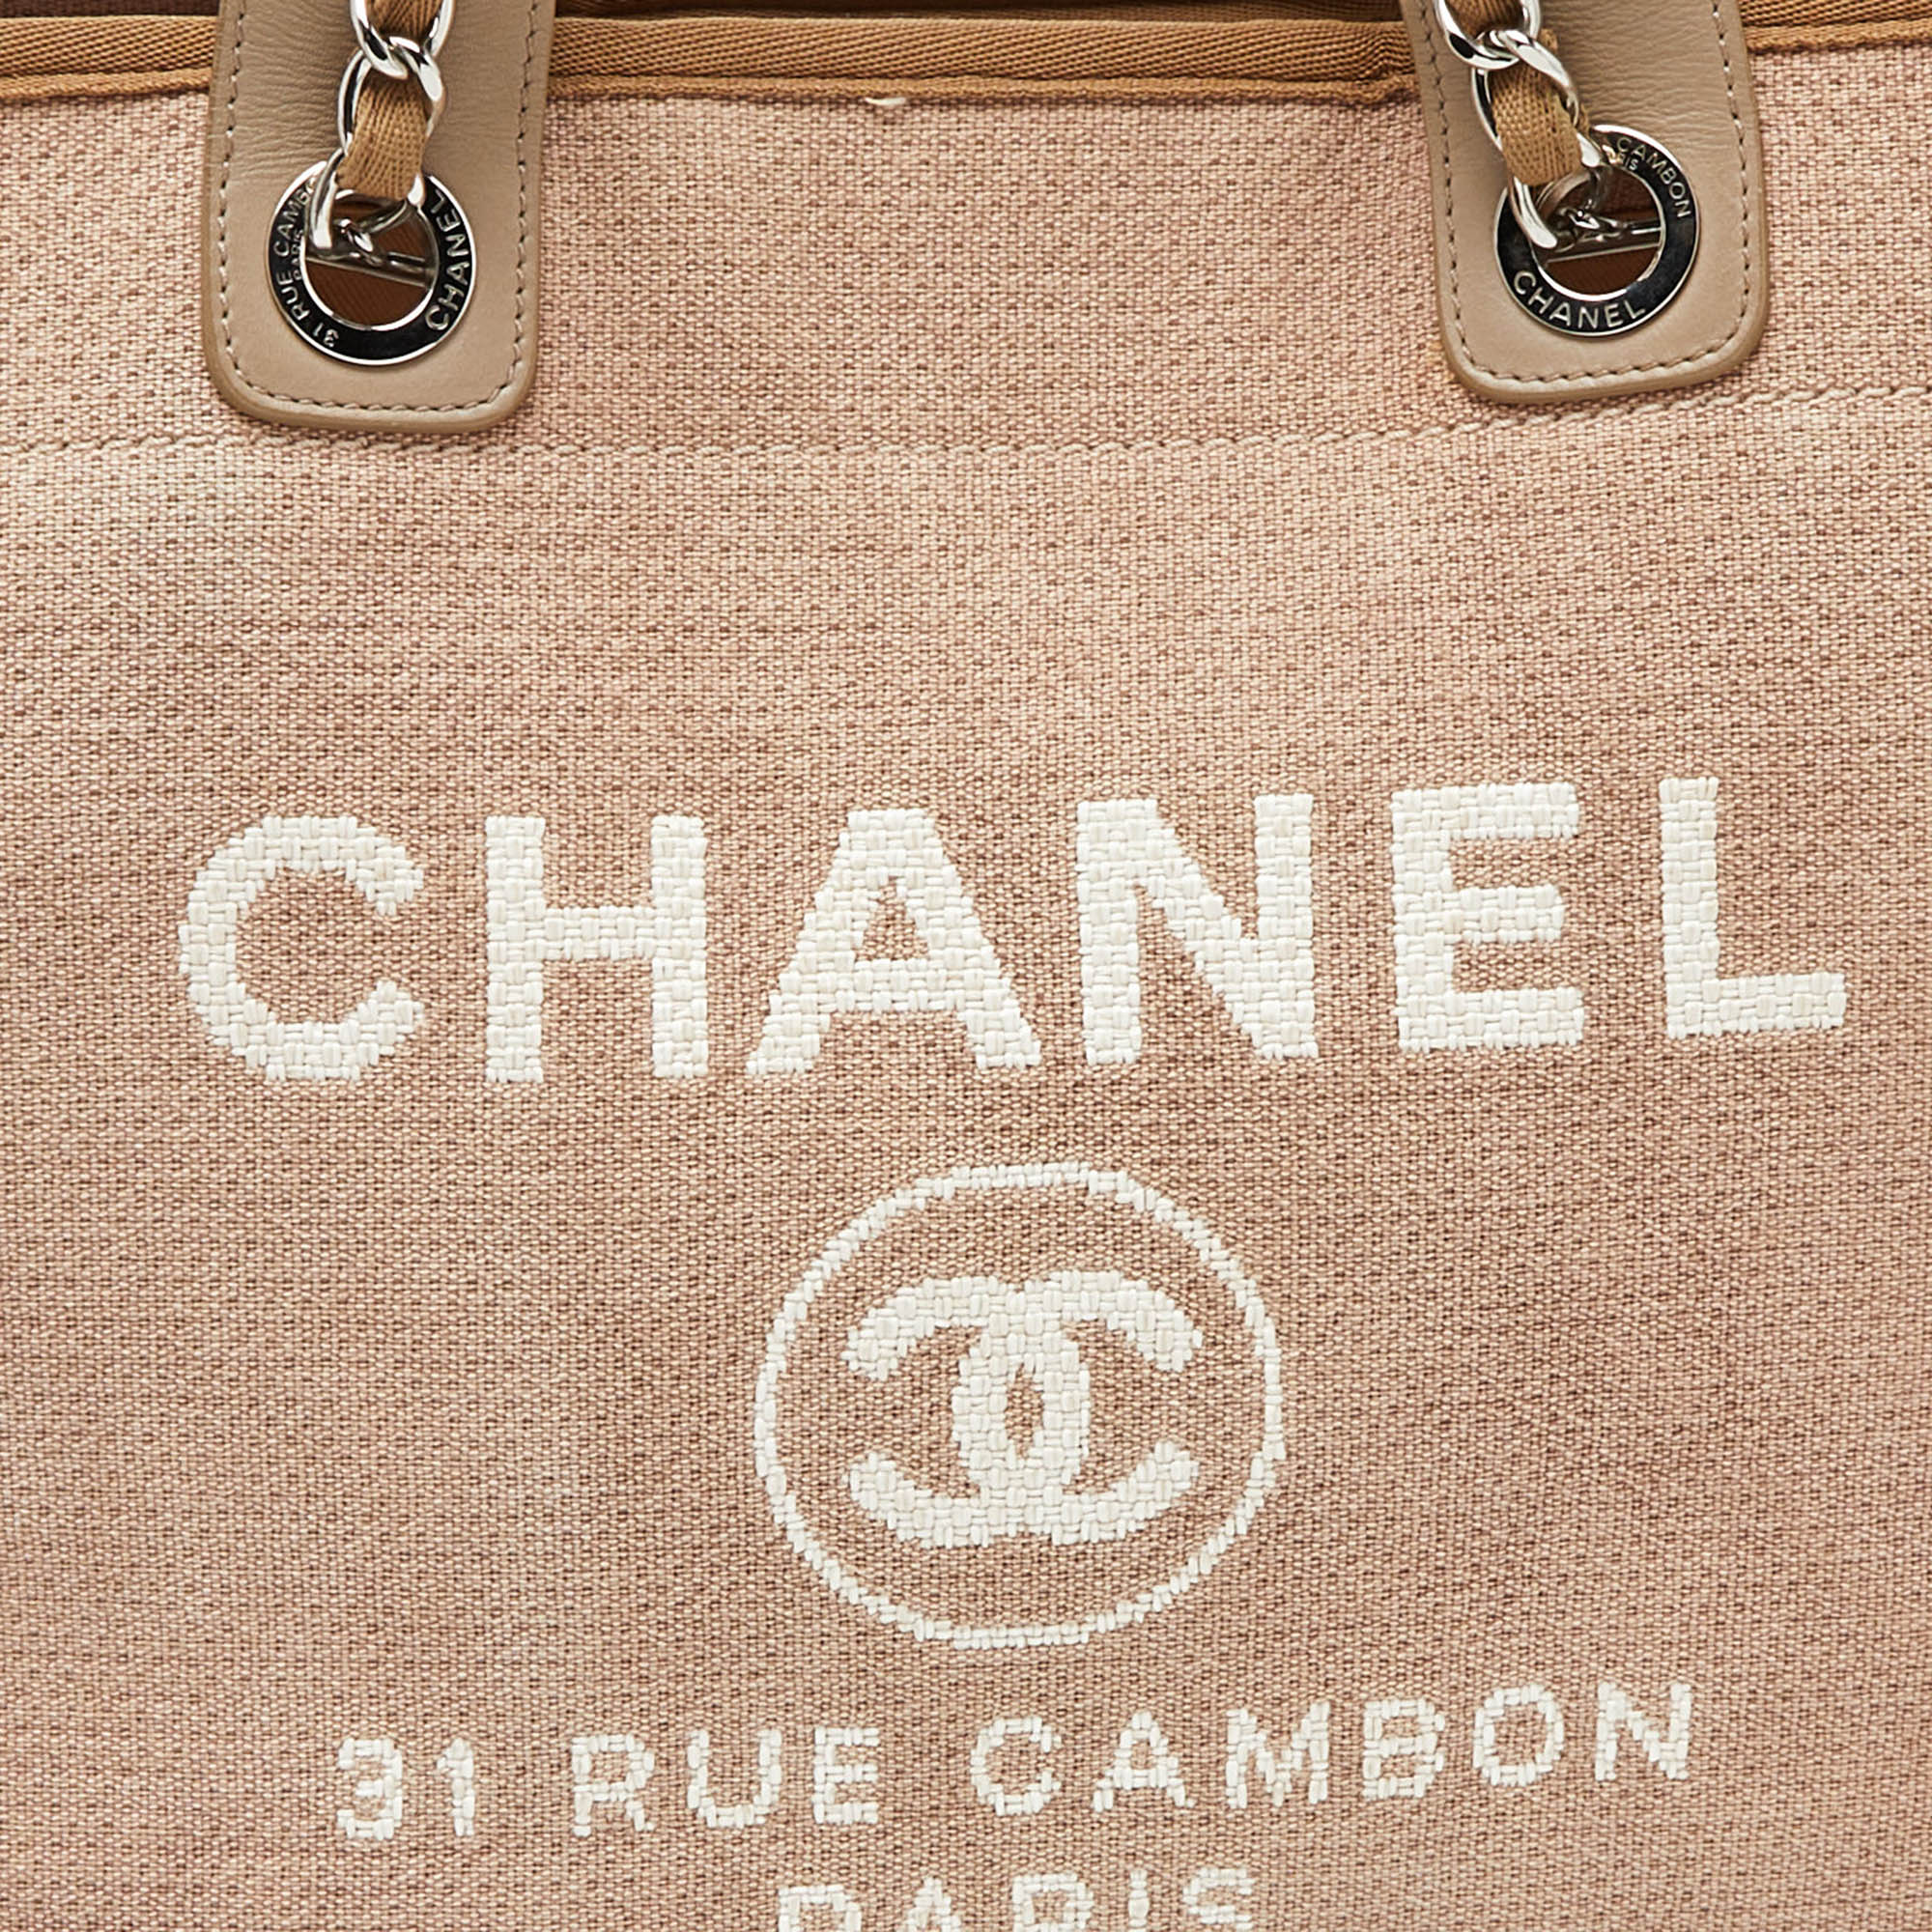 Chanel Beige Canvas And Leather Large Deauville Shopper Tote